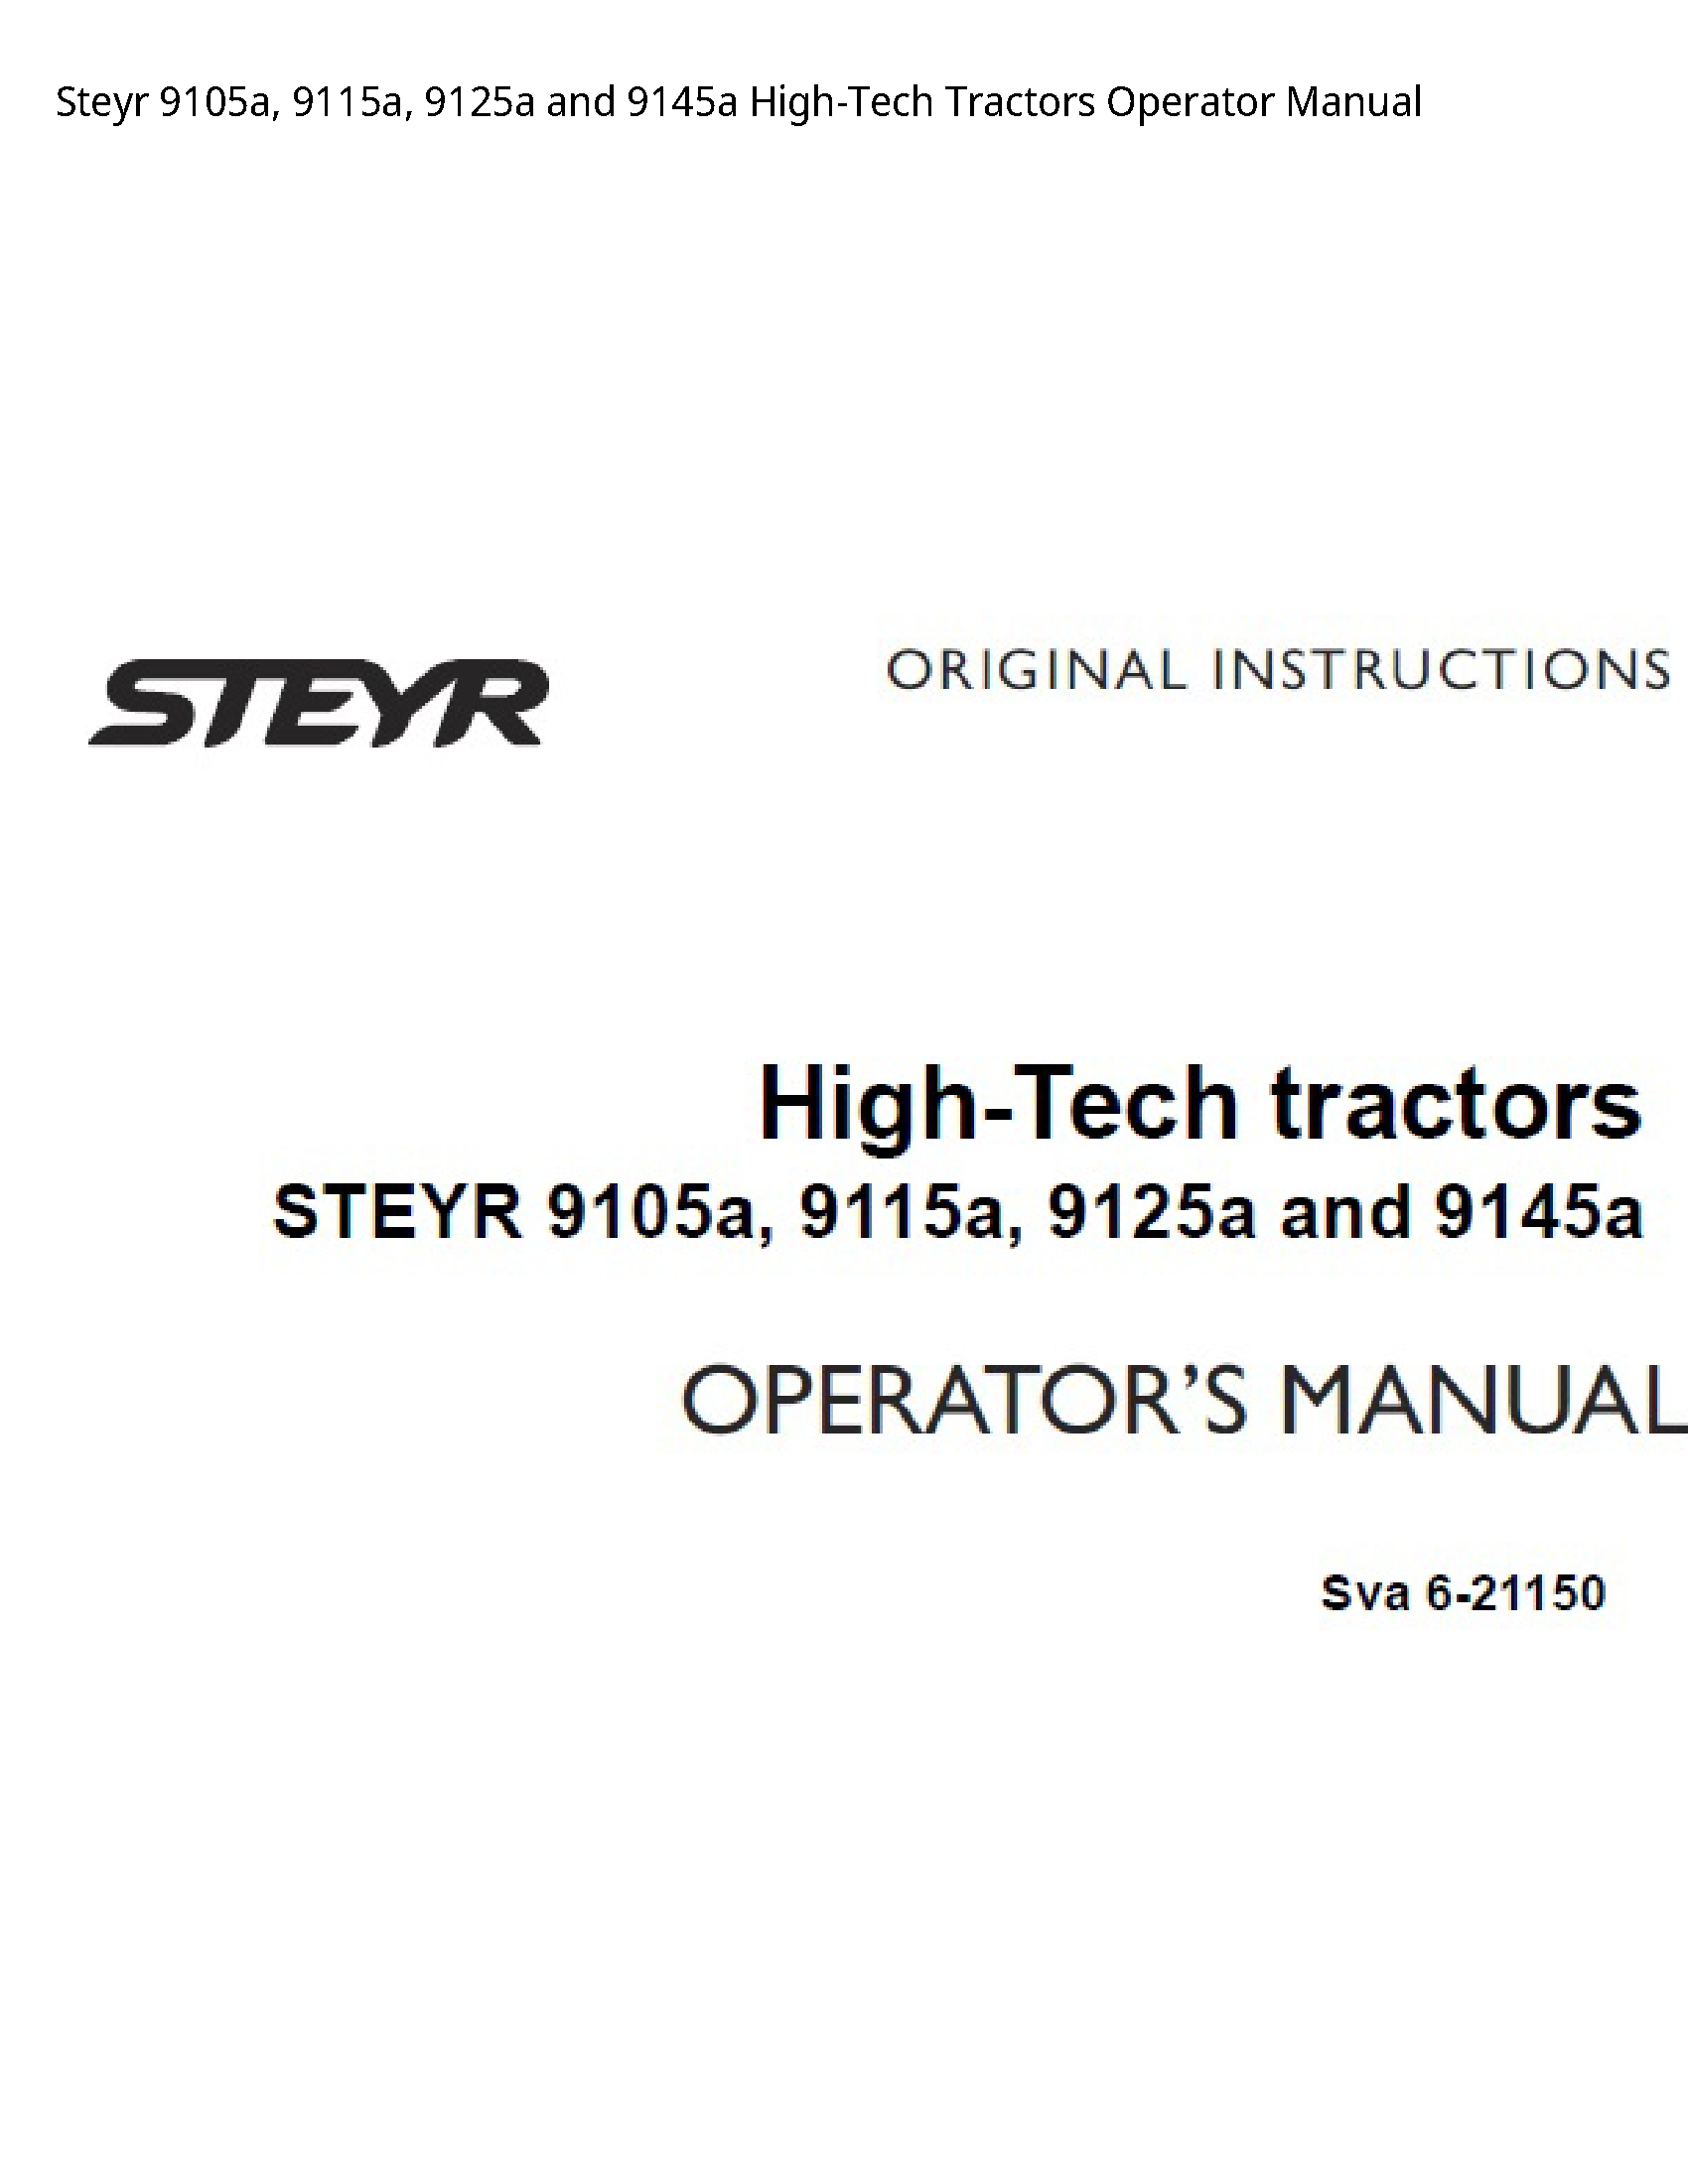 Steyr 9105a  High-Tech Tractors Operator manual